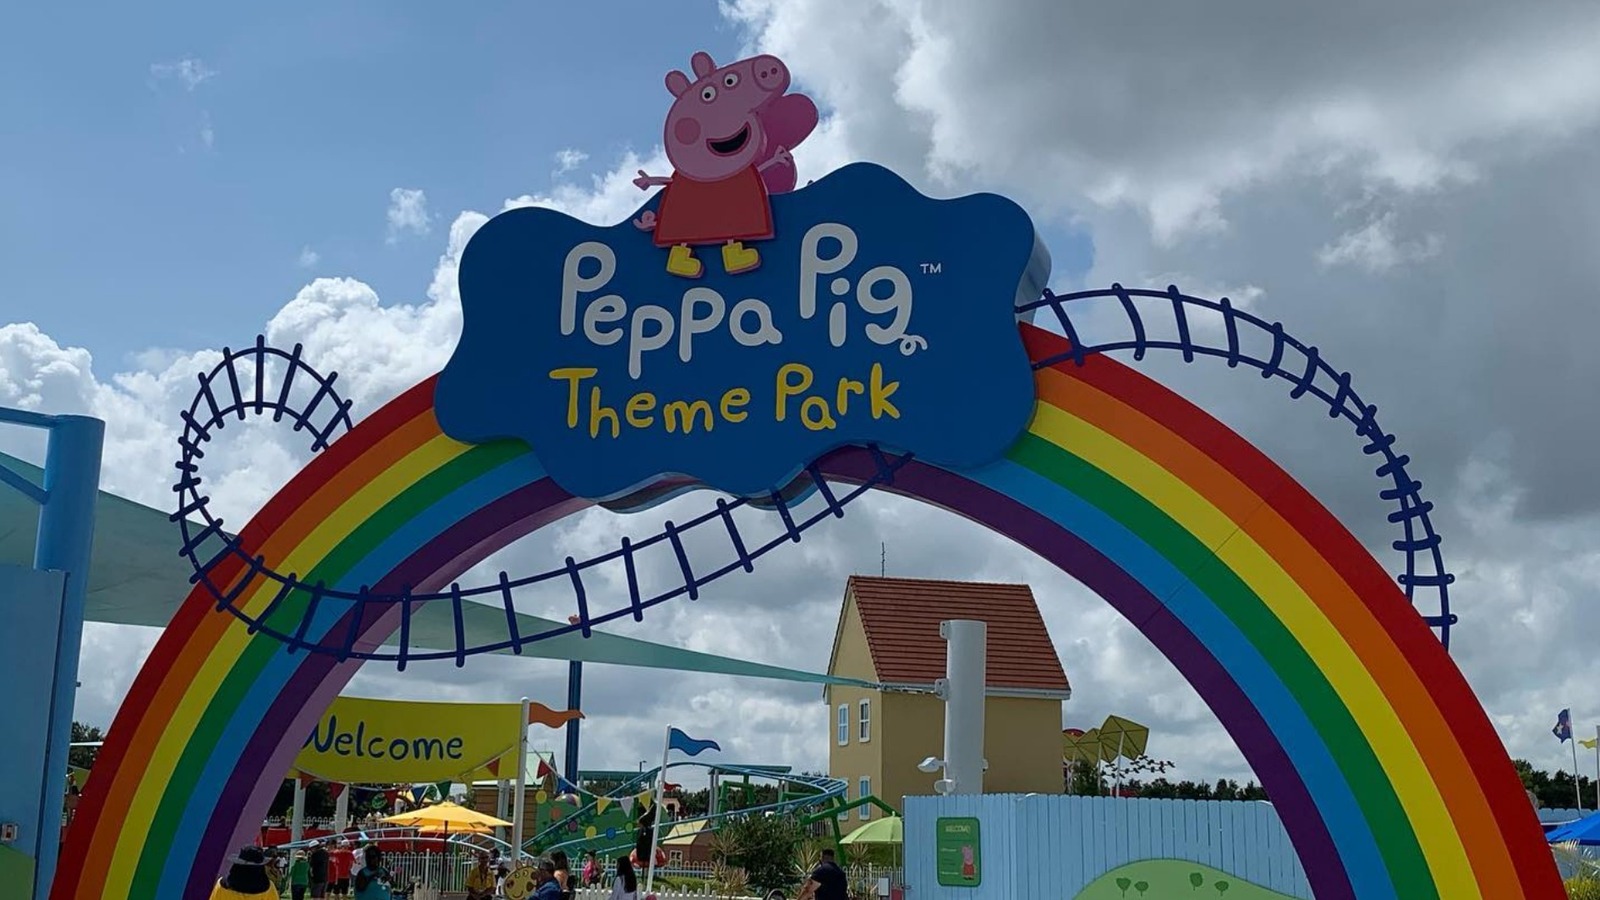 Peppa Pig Theme Park Florida Review & Tips • Family Travel Tips